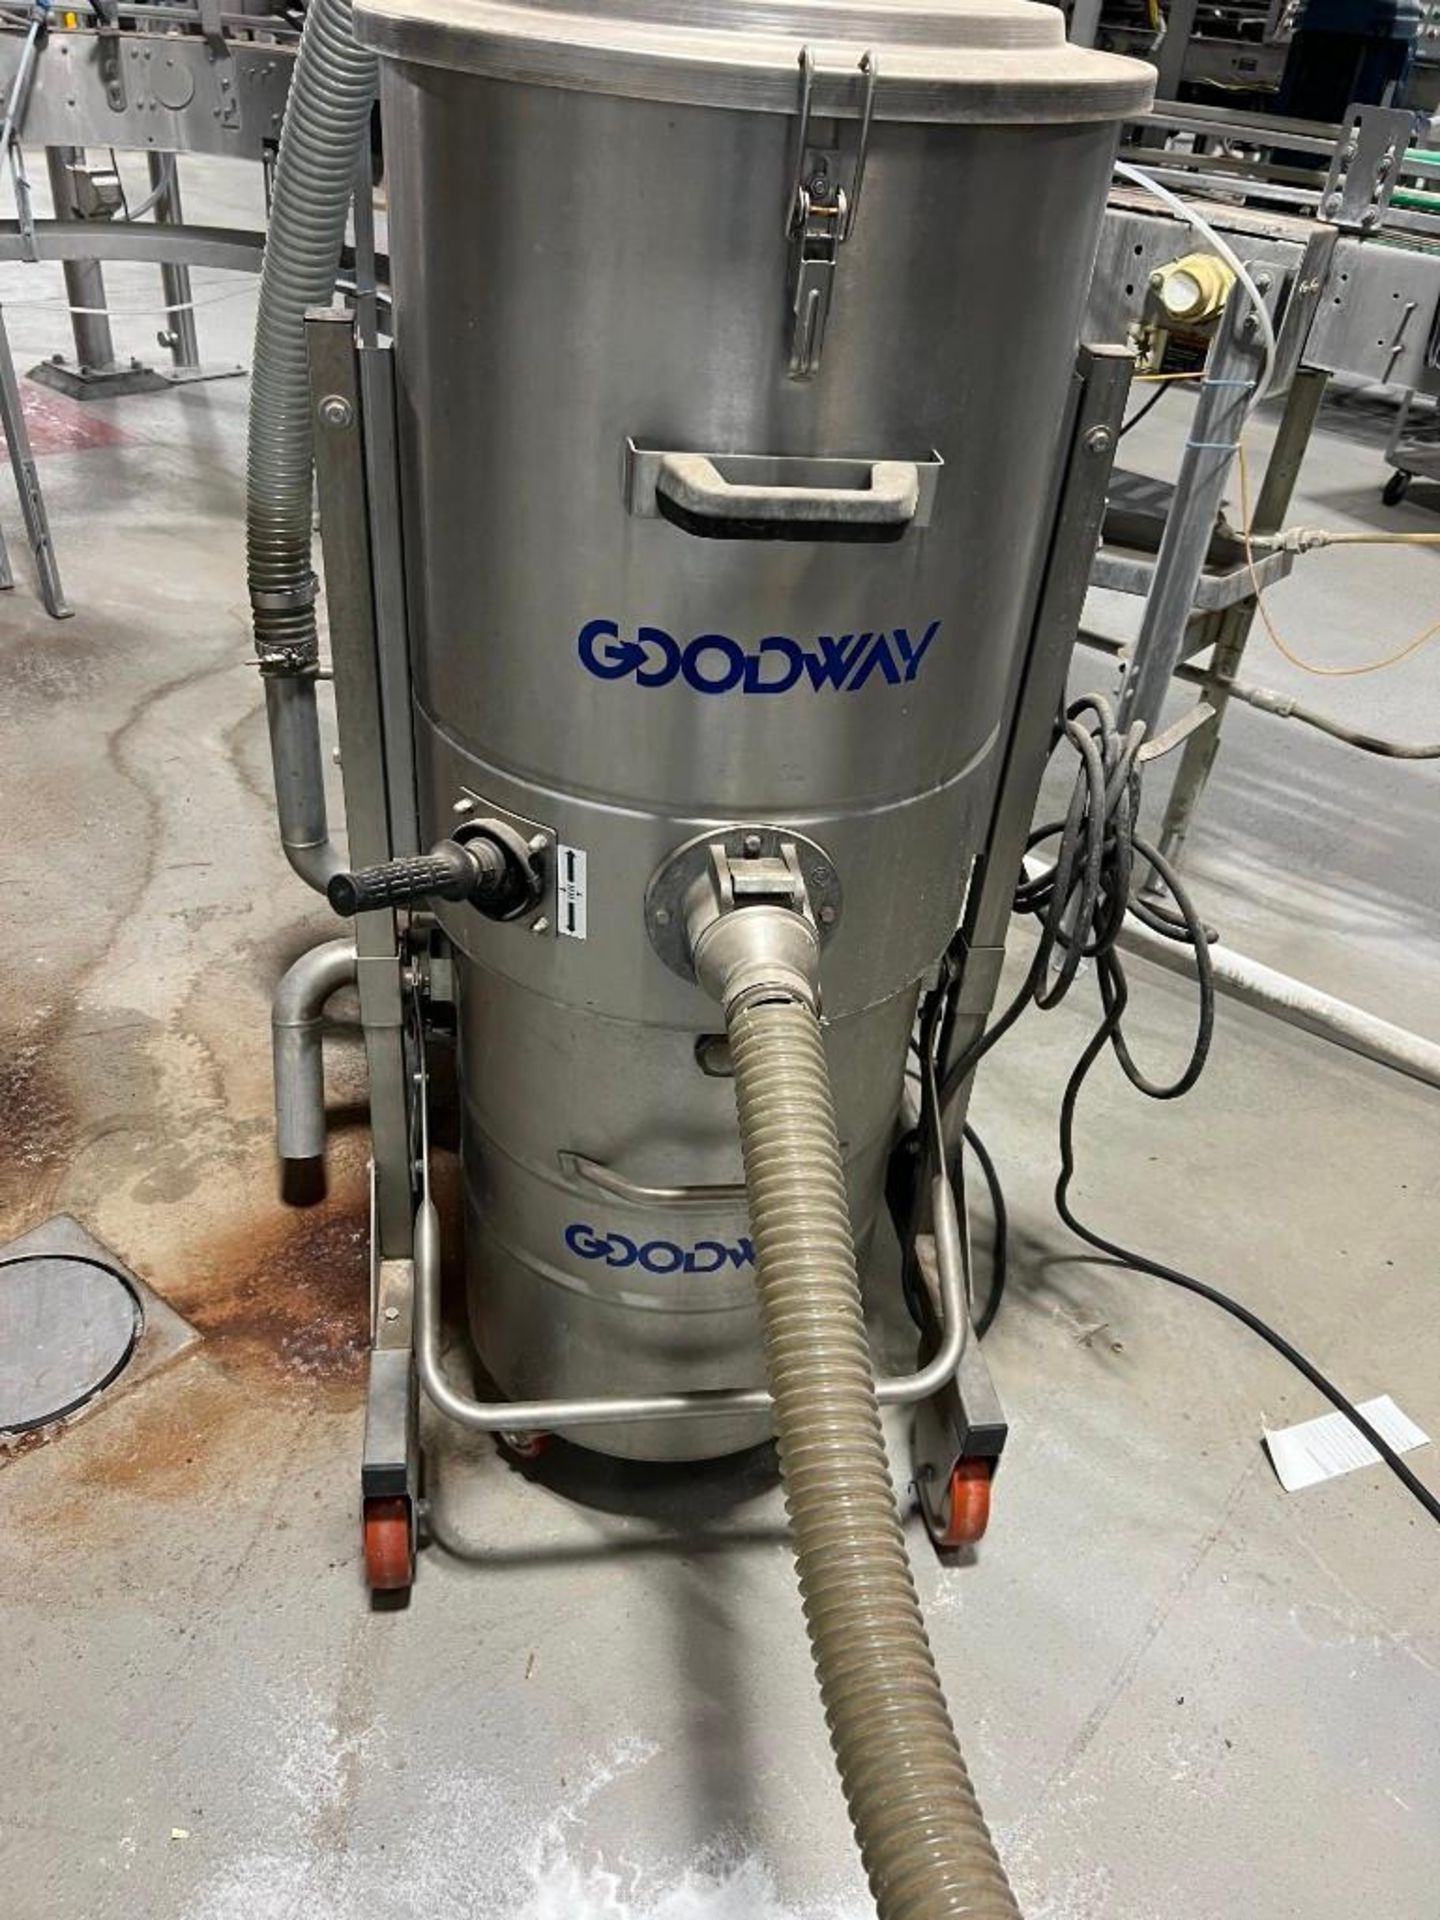 Goodway Self Contained BLOWER Ring Compressor